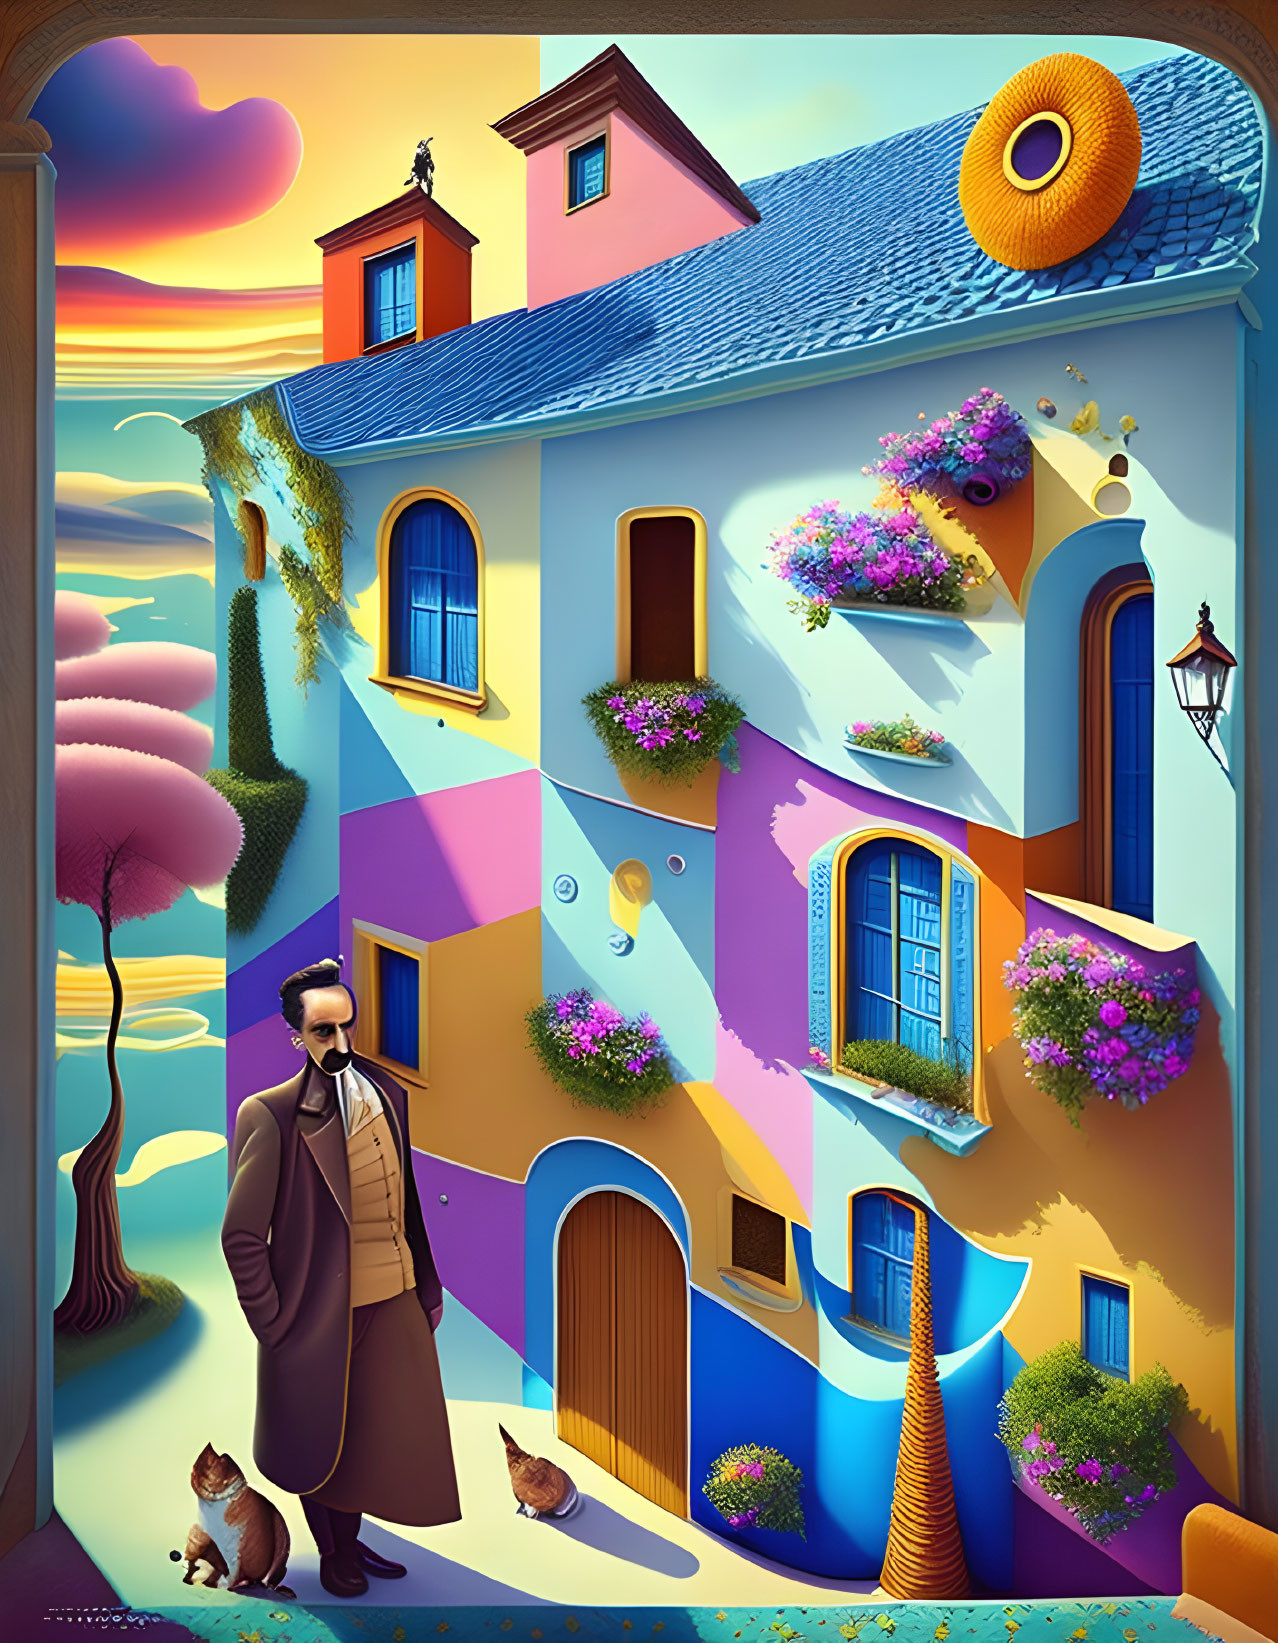 Surreal painting of man with cats near colorful houses and floating islands